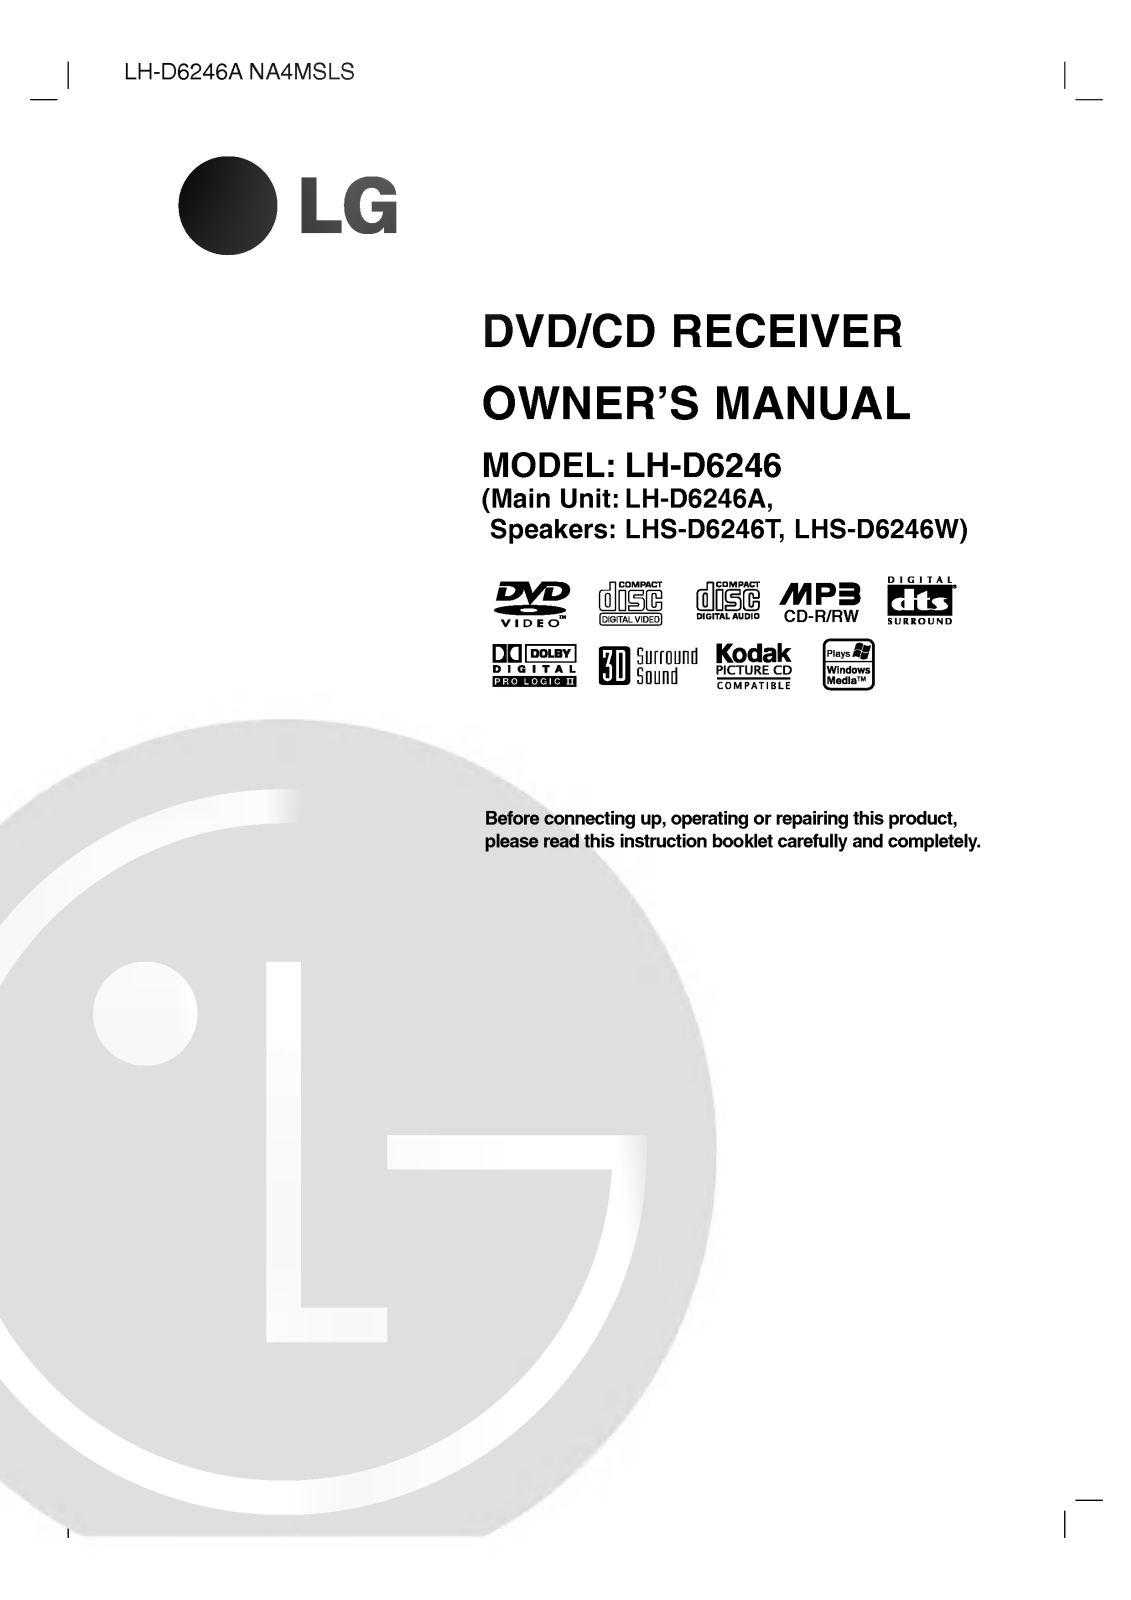 LG LH-D6246A Owner’s Manual